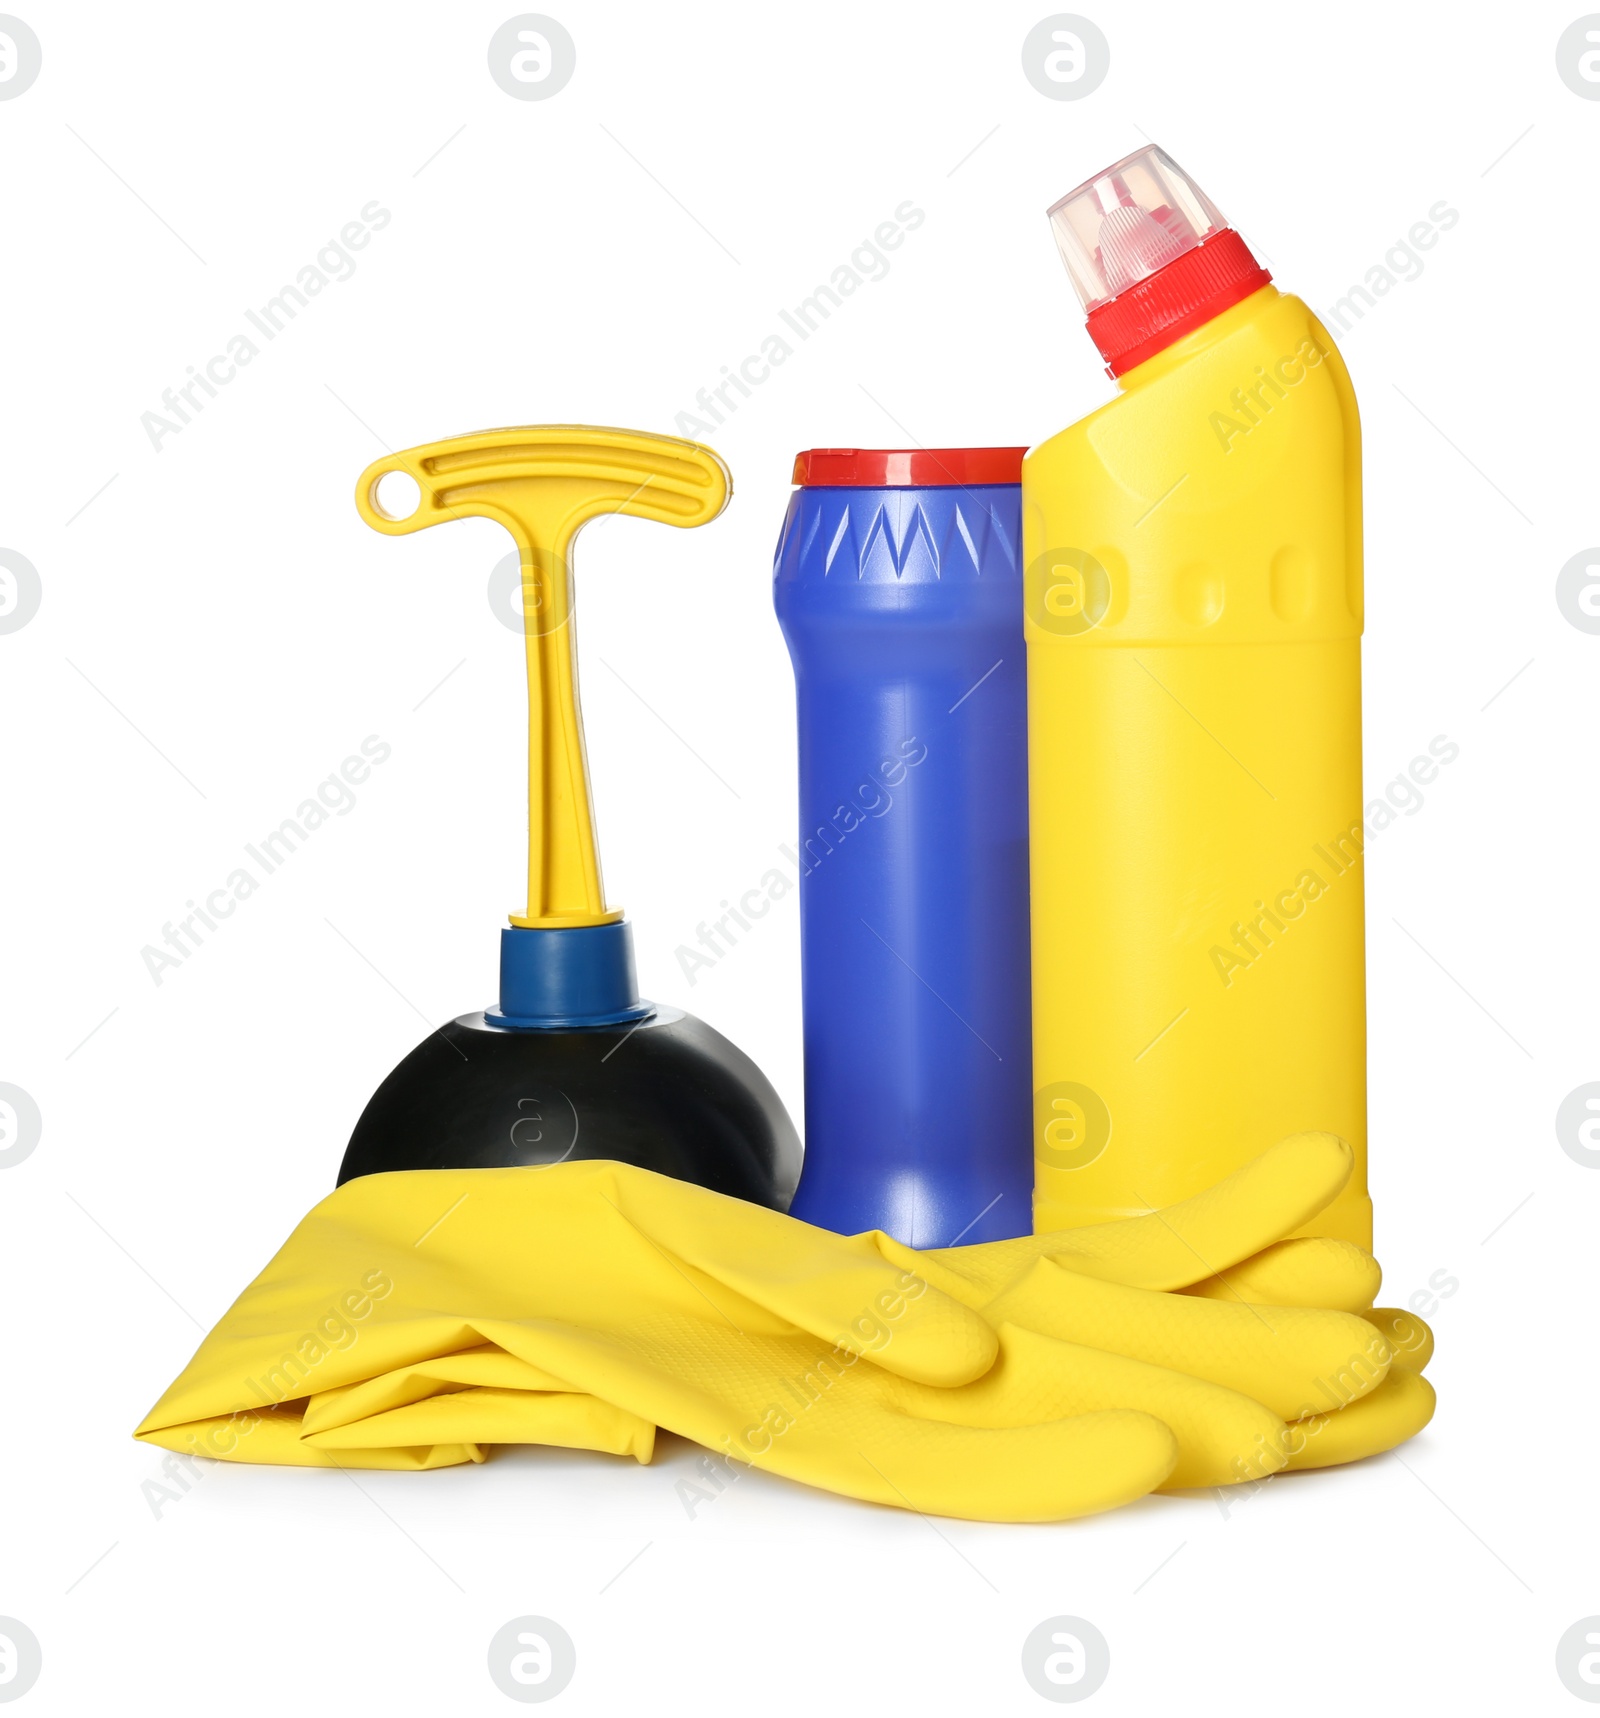 Photo of Toilet cleaner bottles, plunger and gloves isolated on white